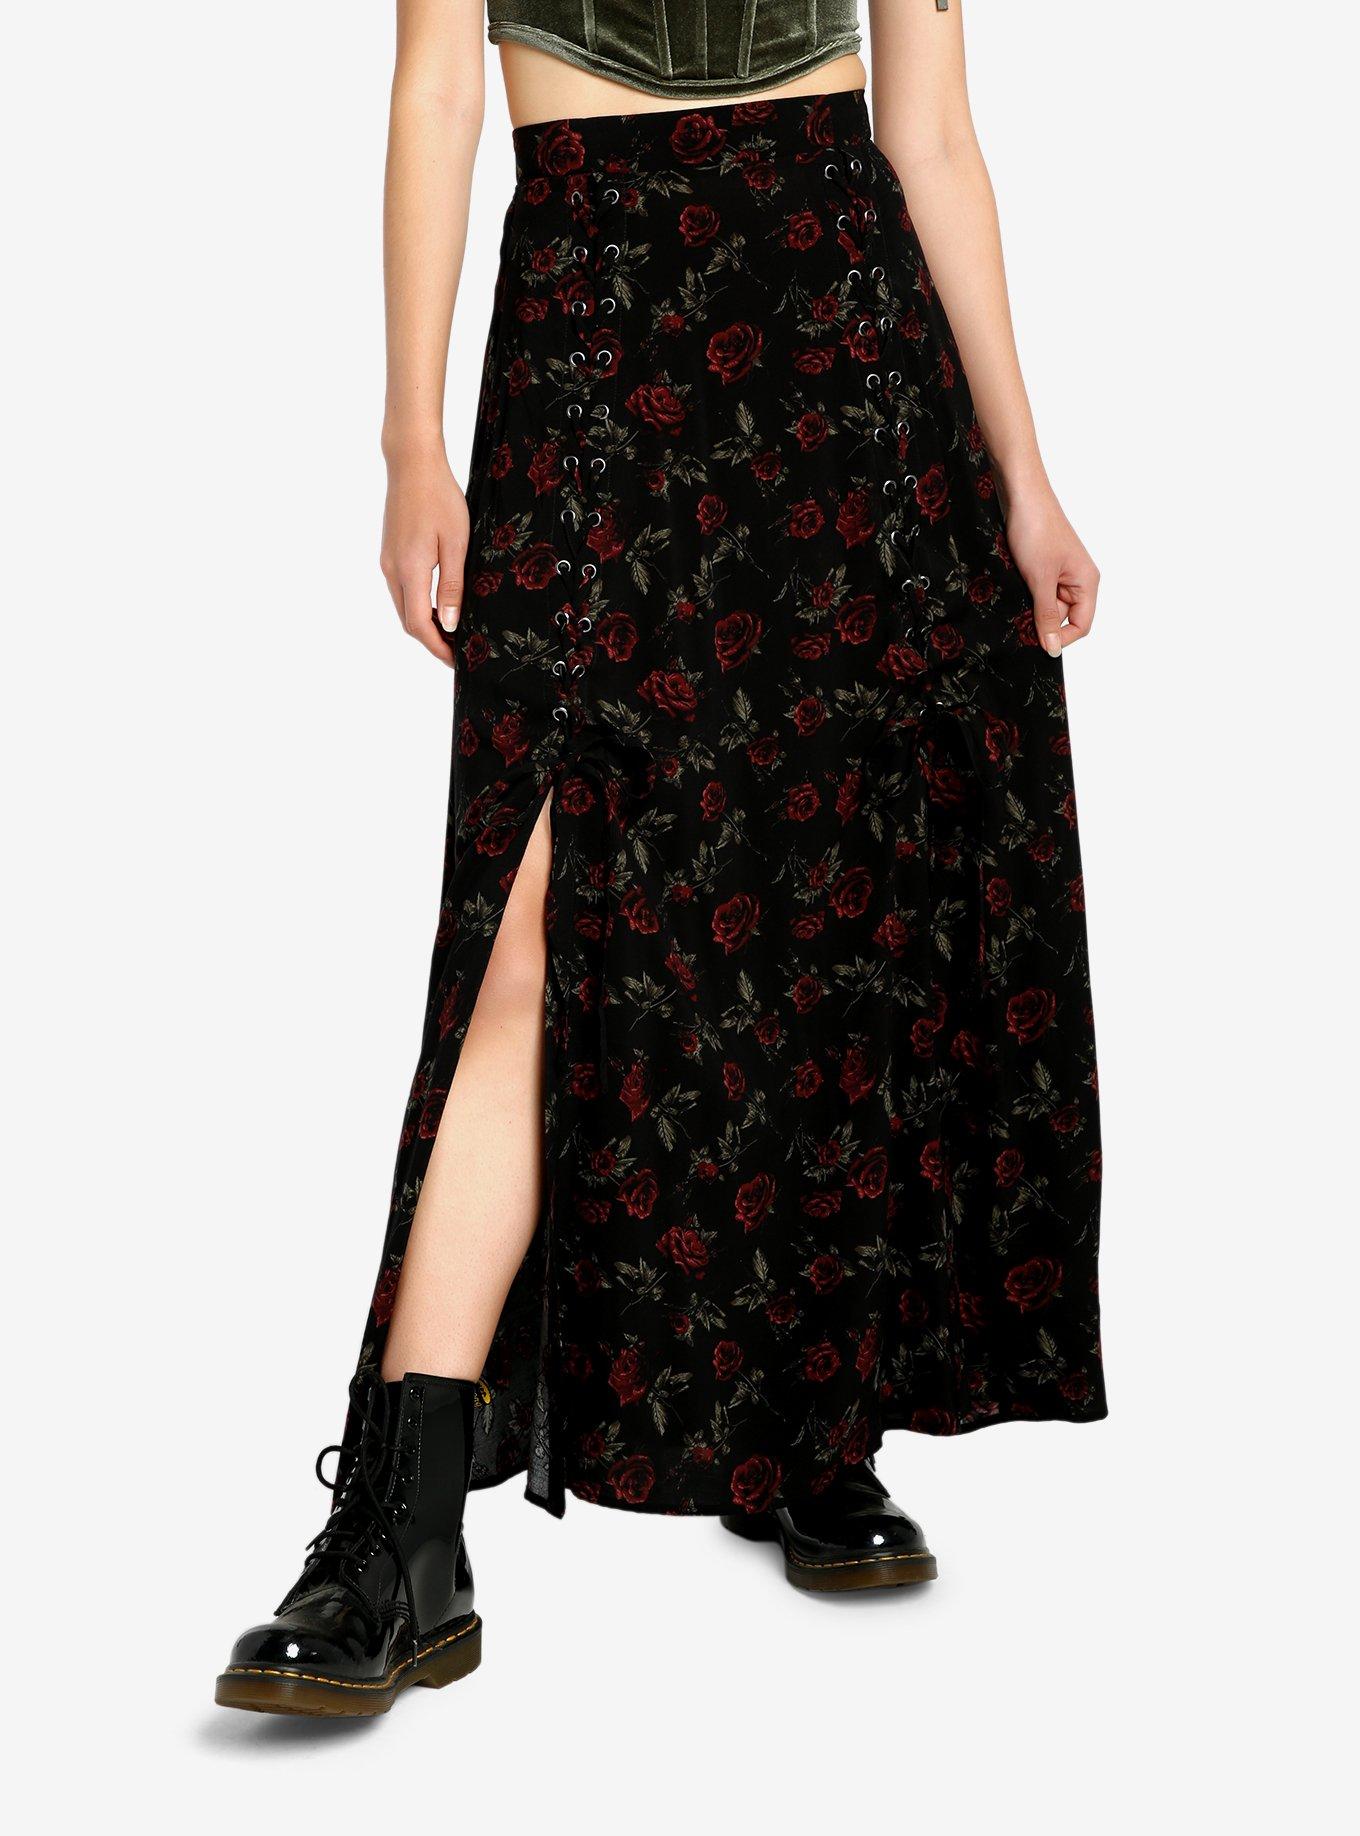 Thorn & Fable Dark Red Rose Lace-Up Maxi Skirt, RED, alternate